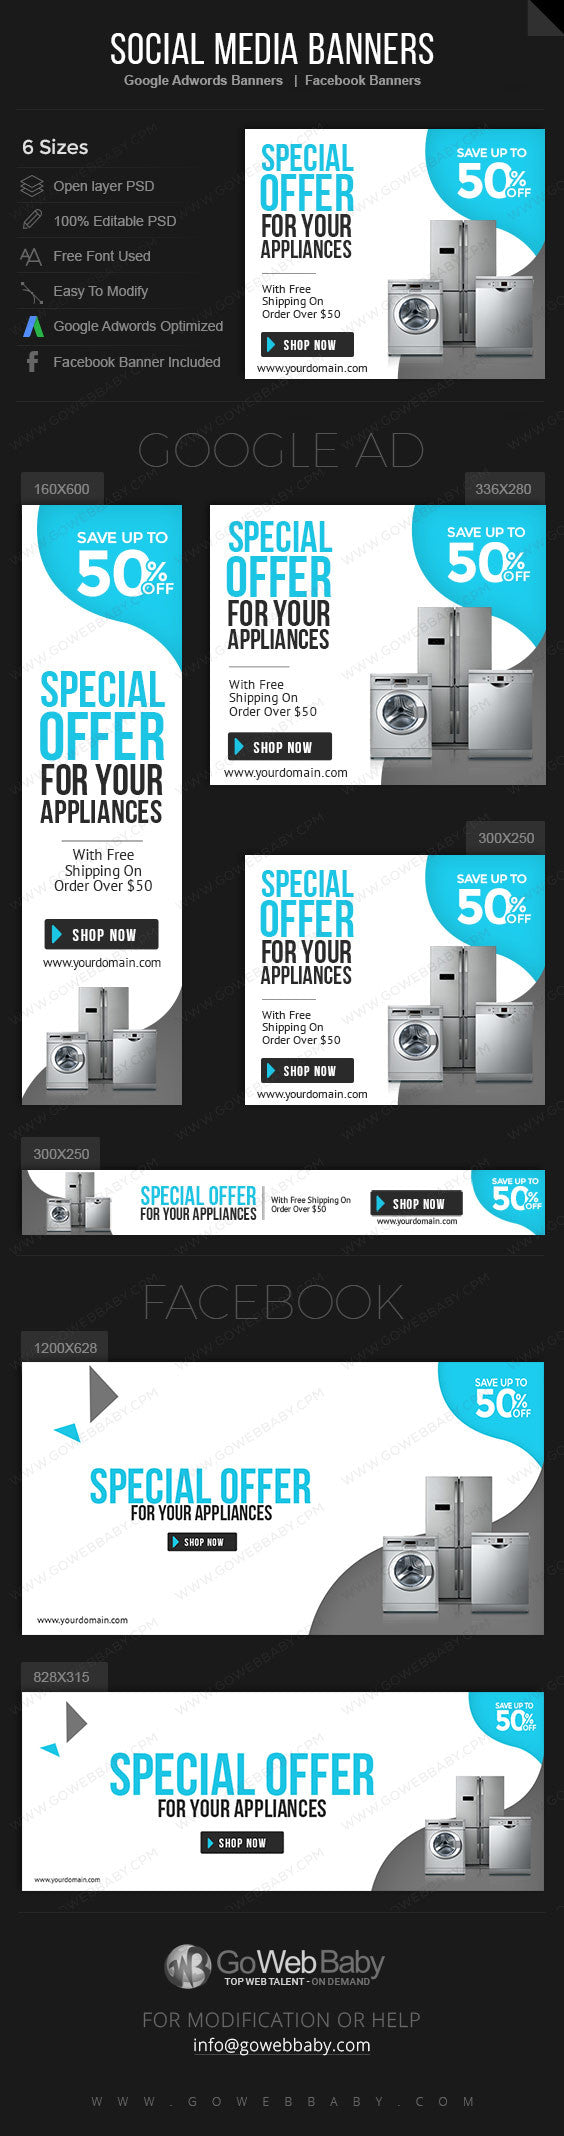 Google Adwords Display Banner with Facebook banners - Appliances Store for Website Marketing - GoWebBaby.Com